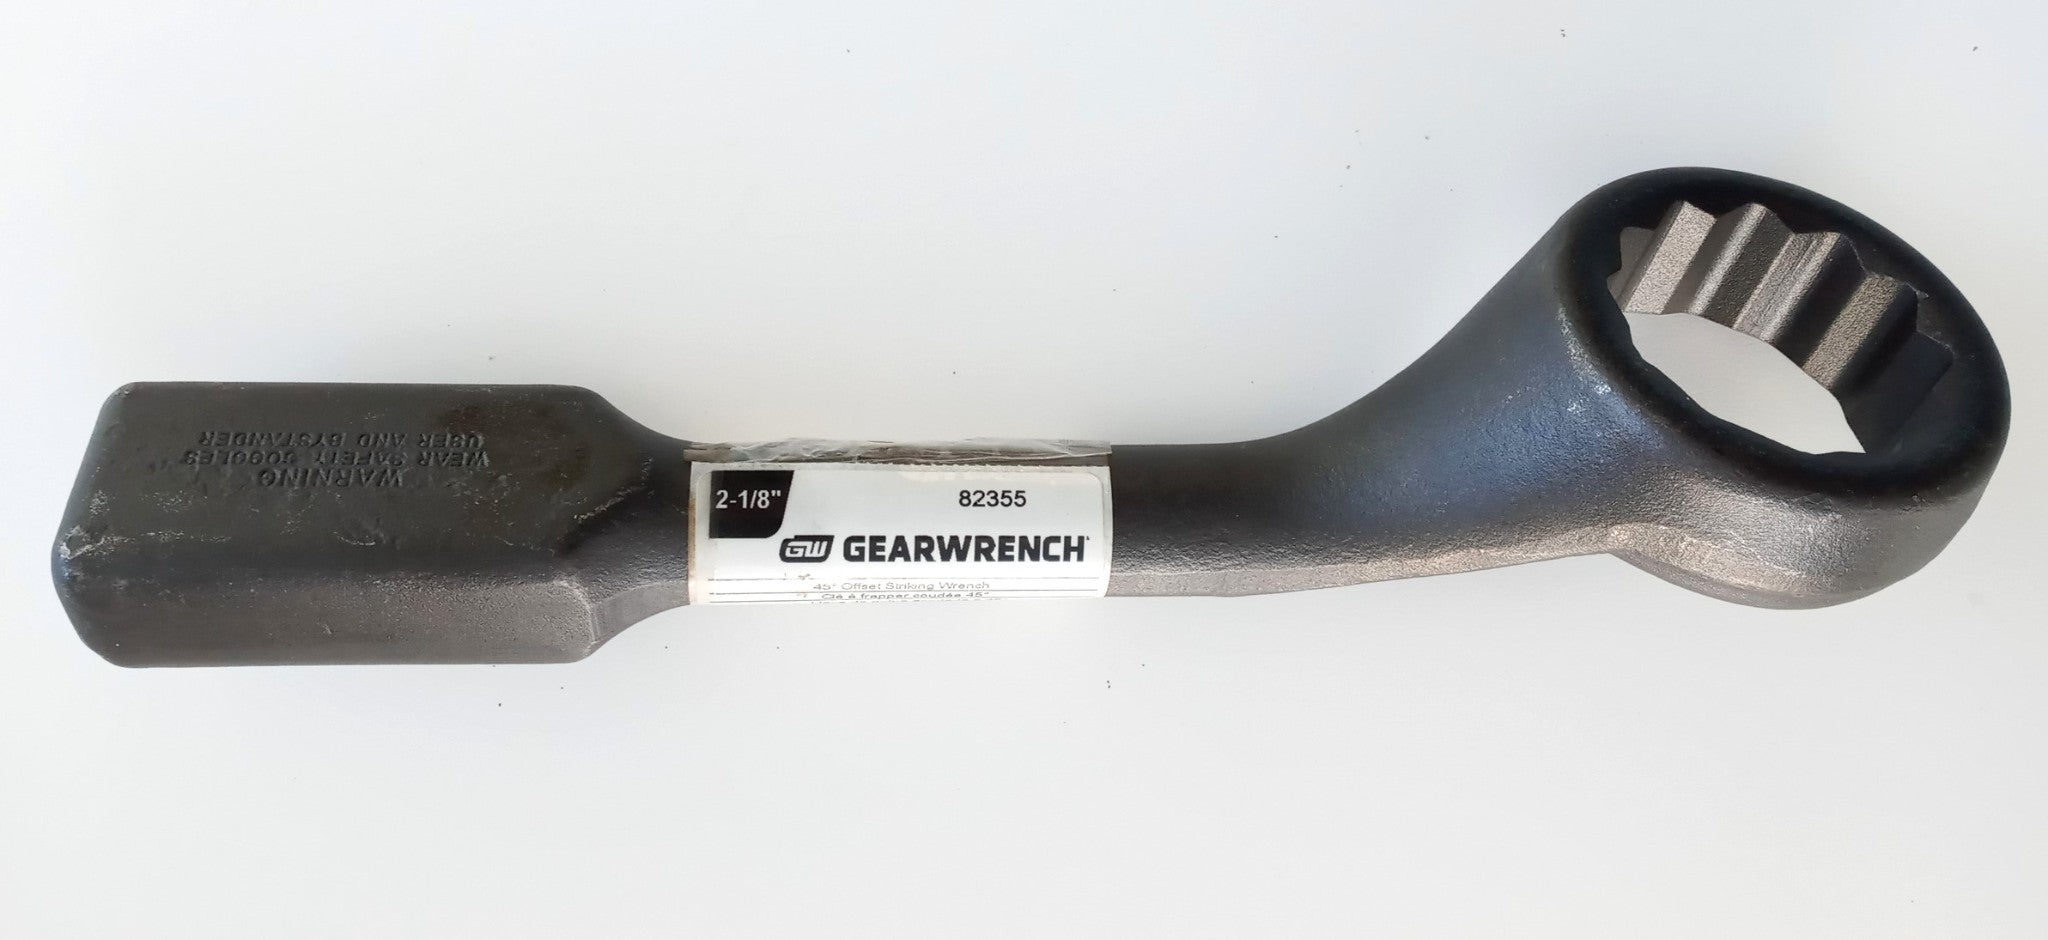 GEARWRENCH 82355 2-1/8" Offset Striking Wrench 45° 12 Point USA